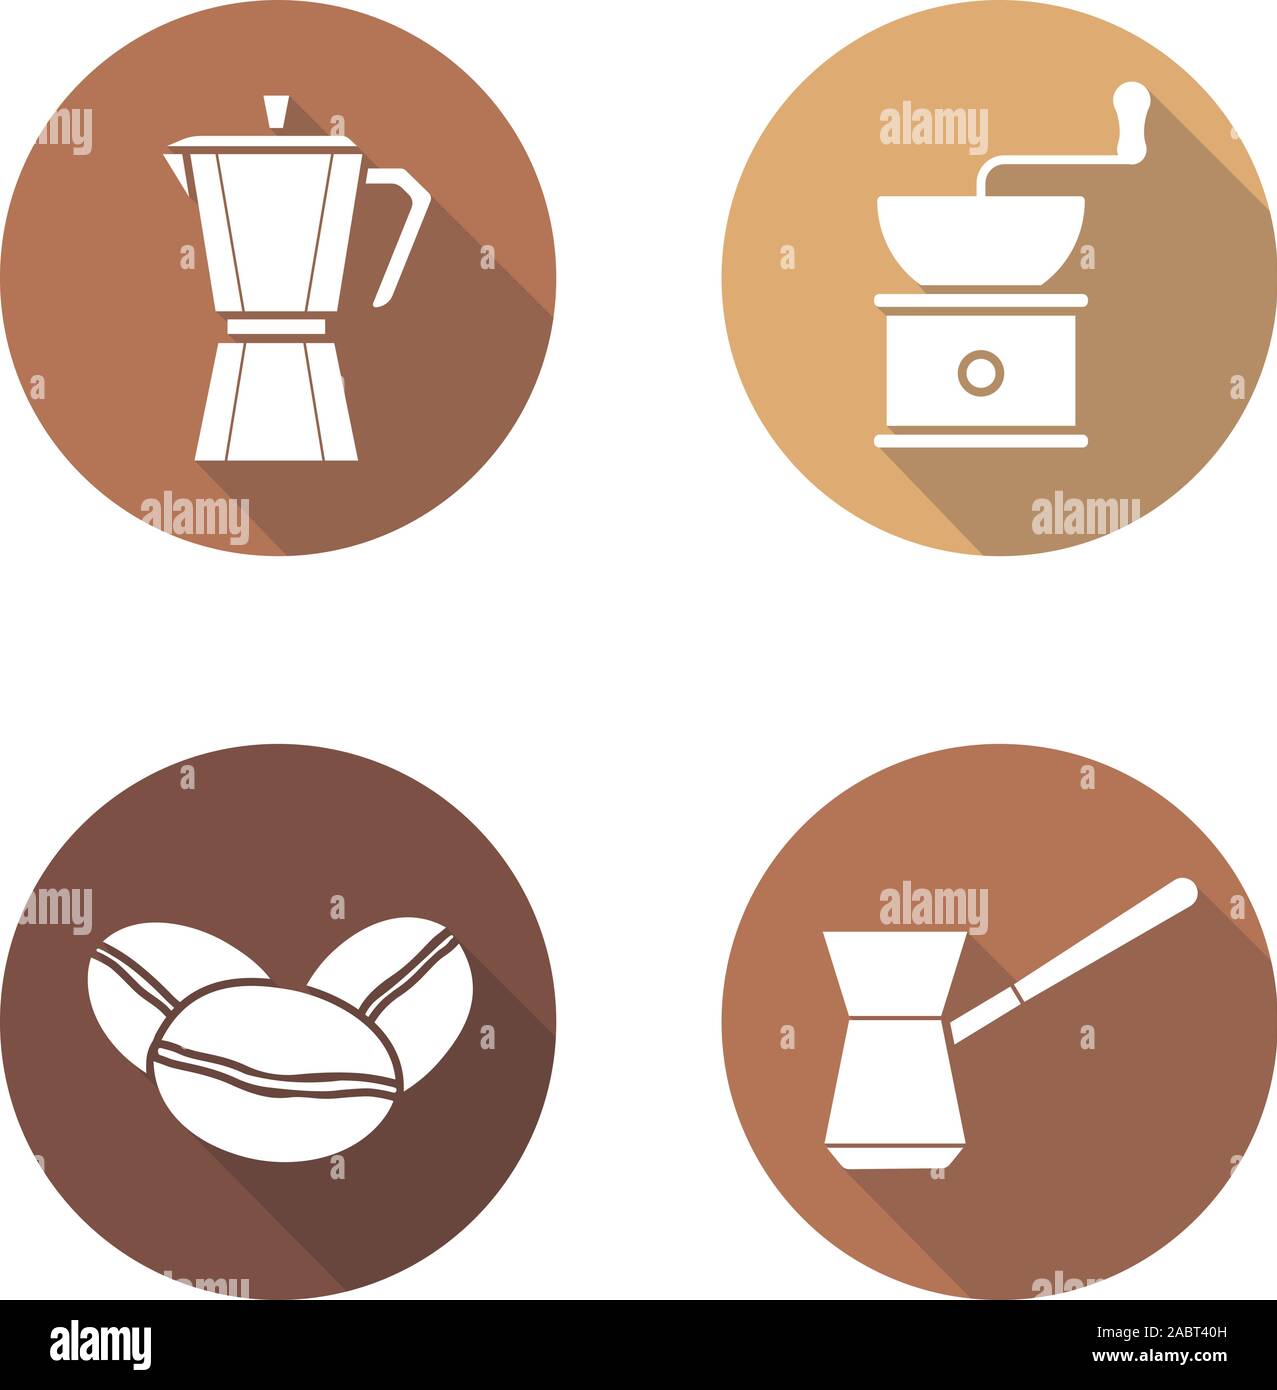 Coffee Brewing Equipment Flat Design Long Shadow Icons Set Moka Pot Classic Coffee Maker Turkish Cezve Grinder And Beans Vector Silhouette Illust Stock Vector Image Art Alamy